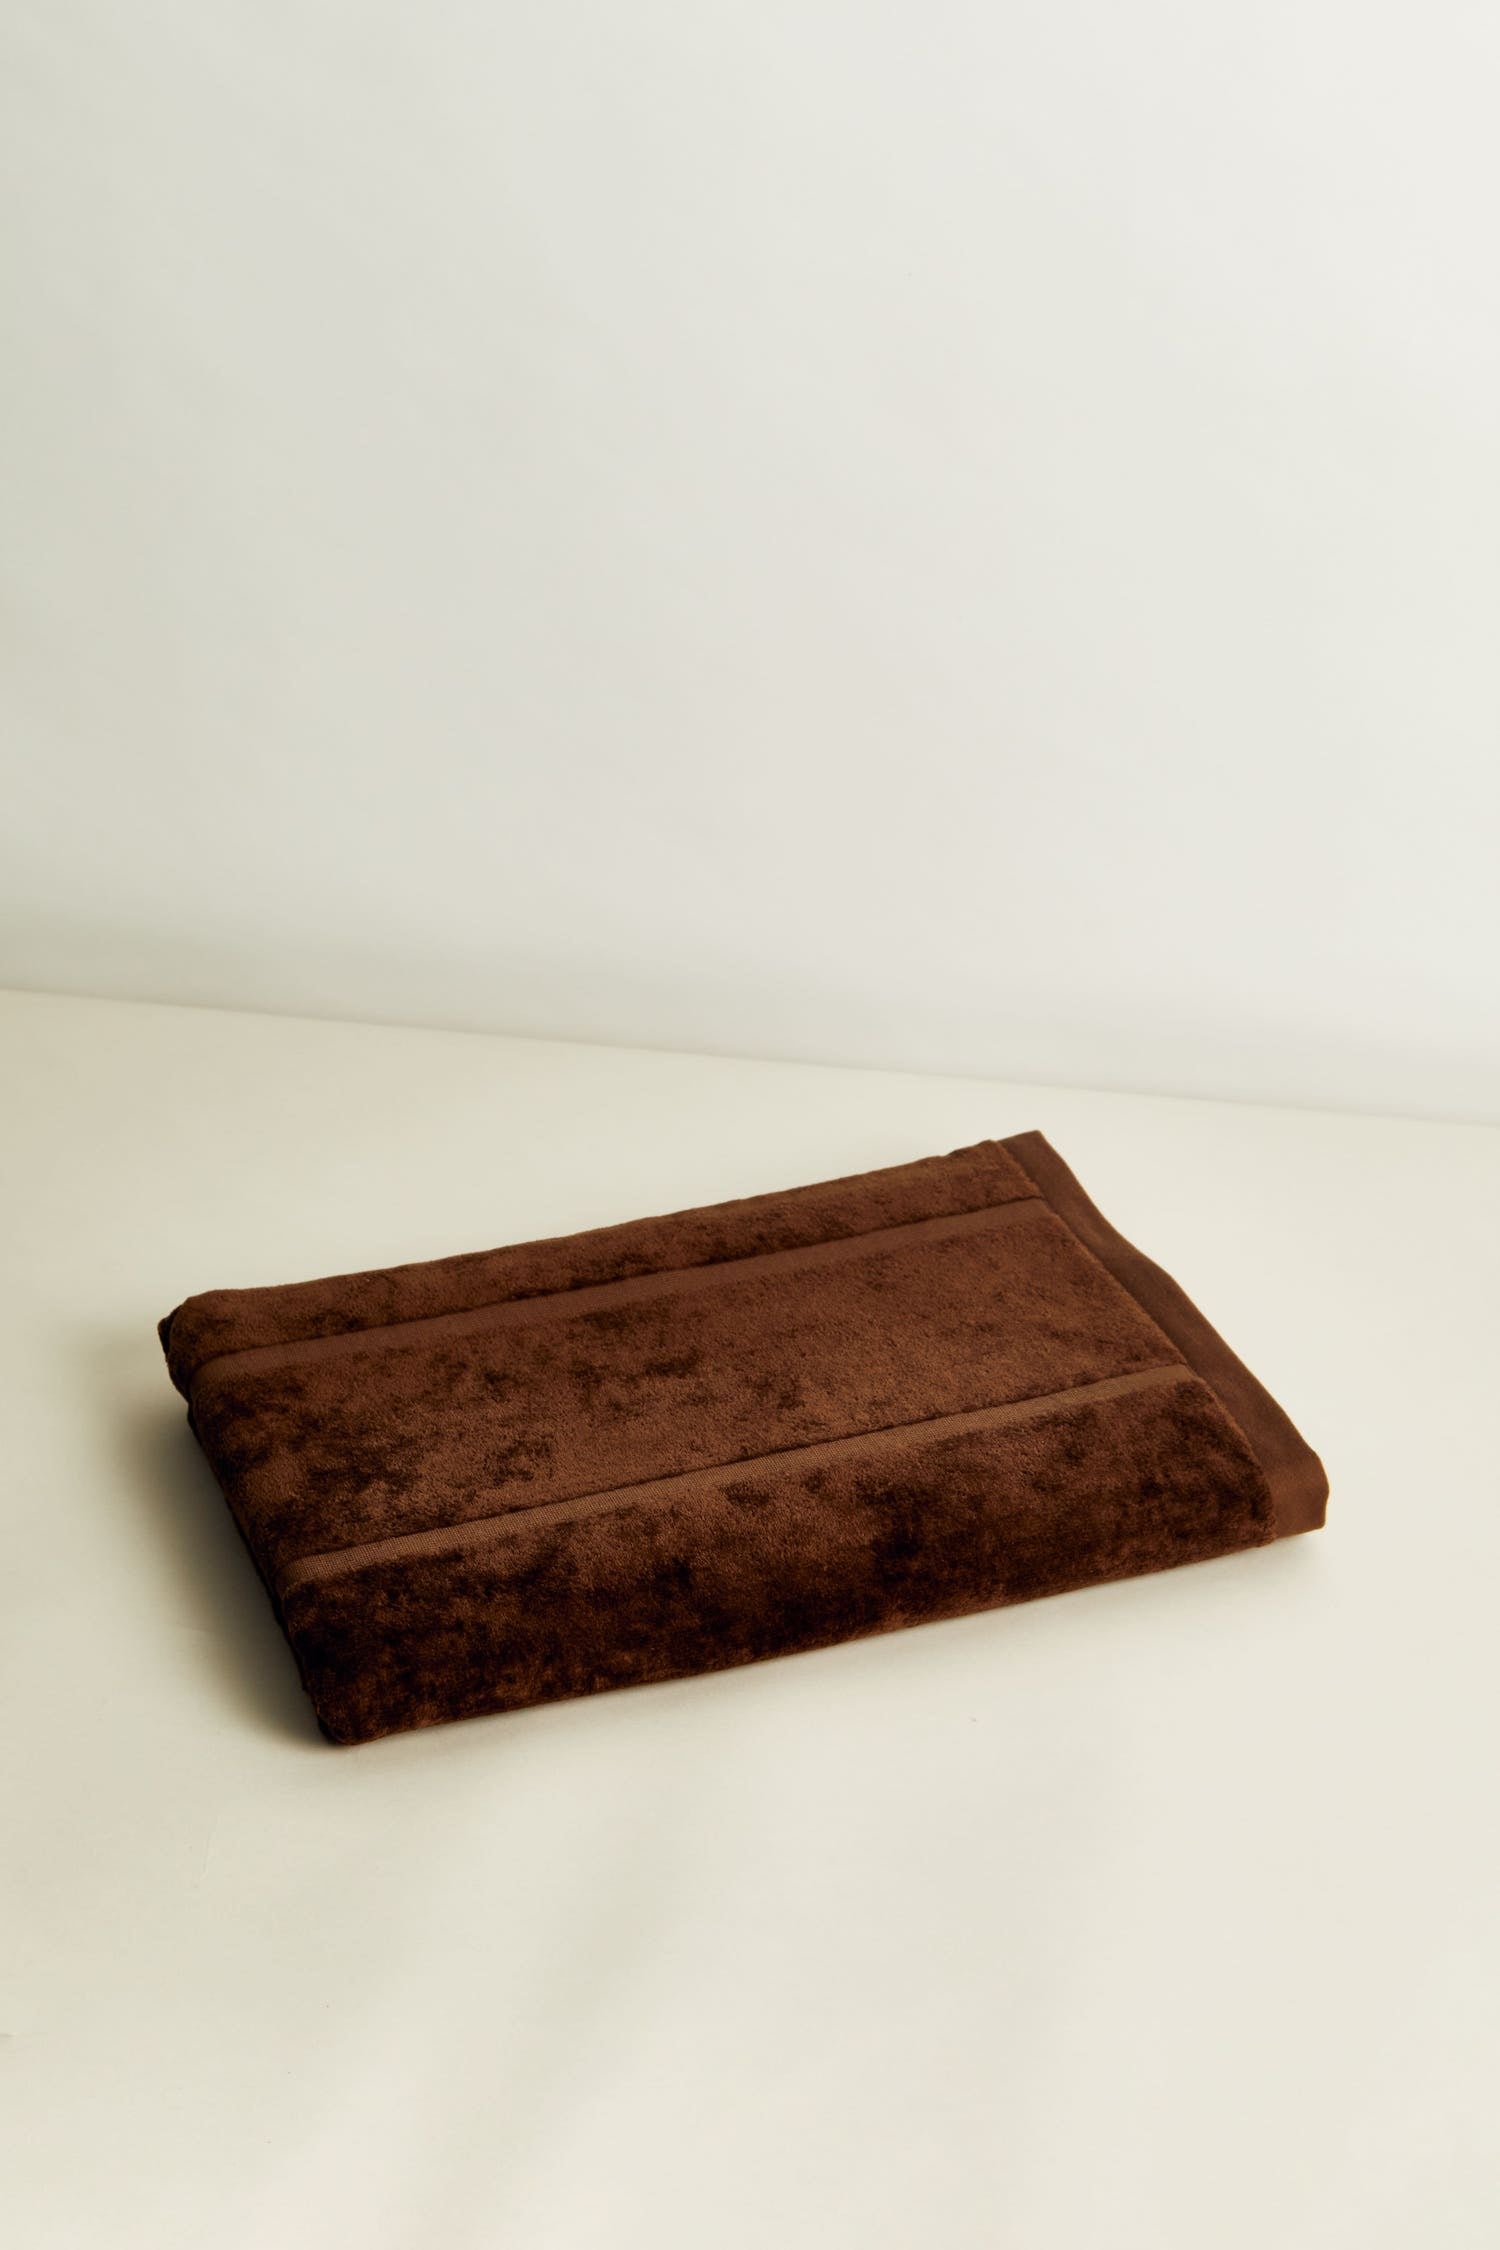 Woodford Organic Cotton Pool Towel in Tabac. An elevated, everyday bath, beach or poolside towel with a jacquard cut pile gate motif in brown with a luxuriously soft, 100% organic cotton hand. 